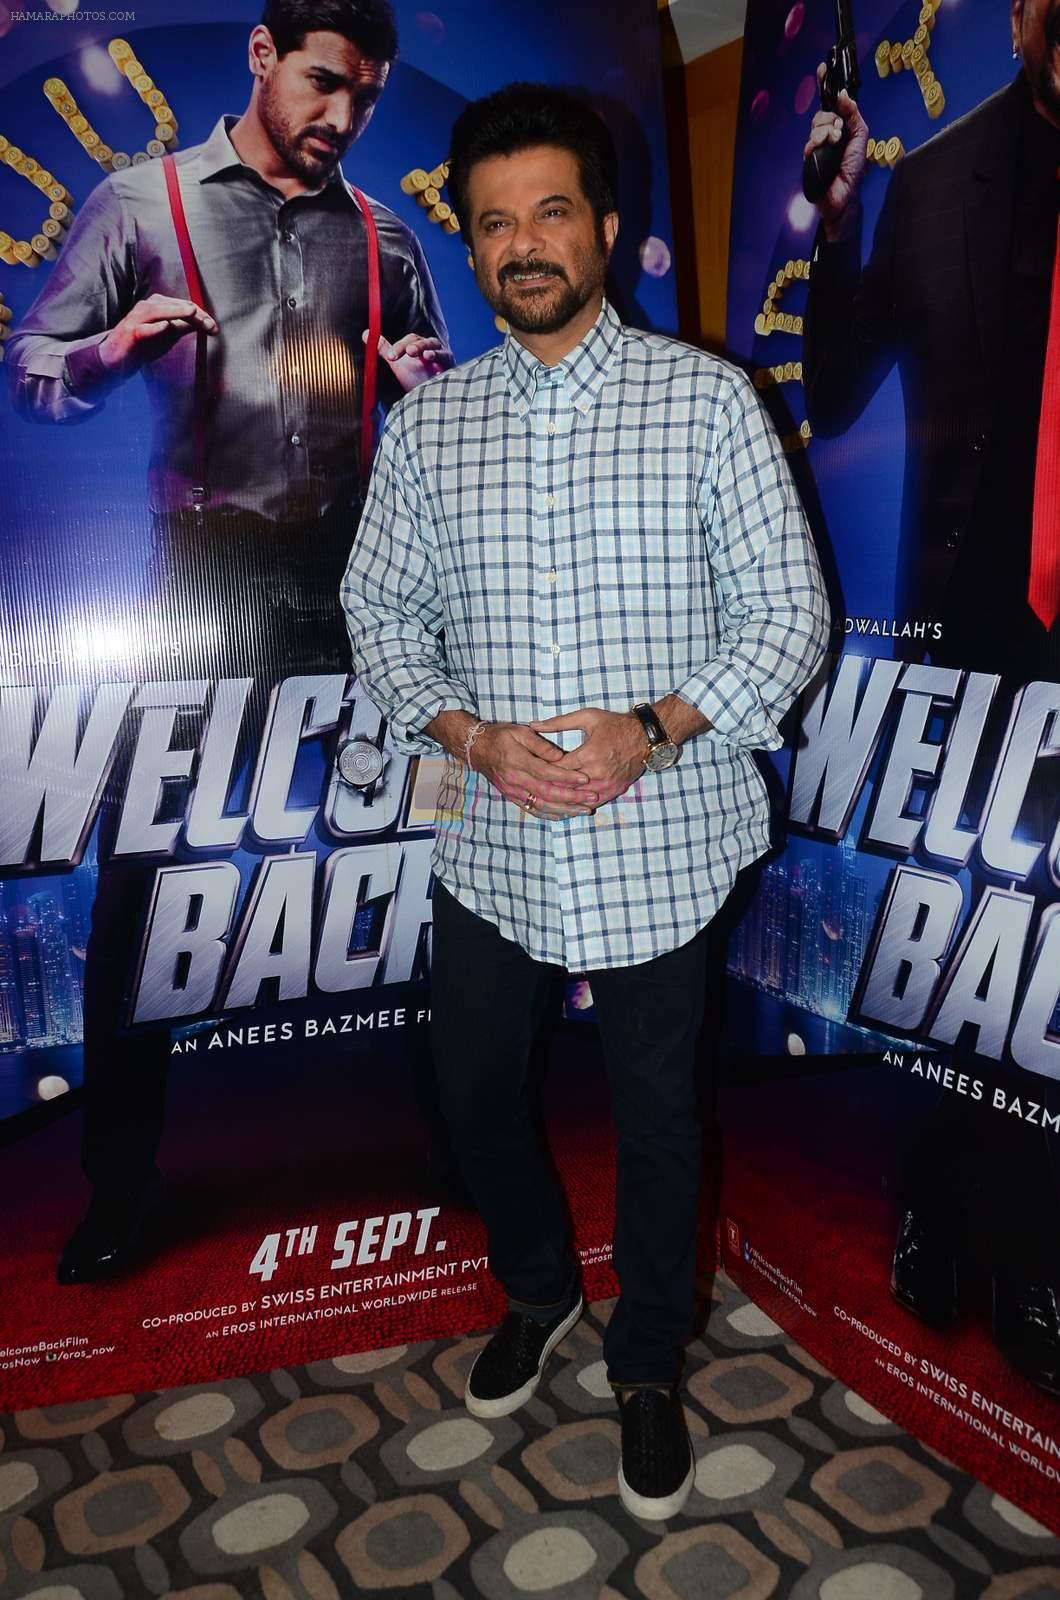 Anil Kapoor promote Welcome Back on 7th Aug 2015